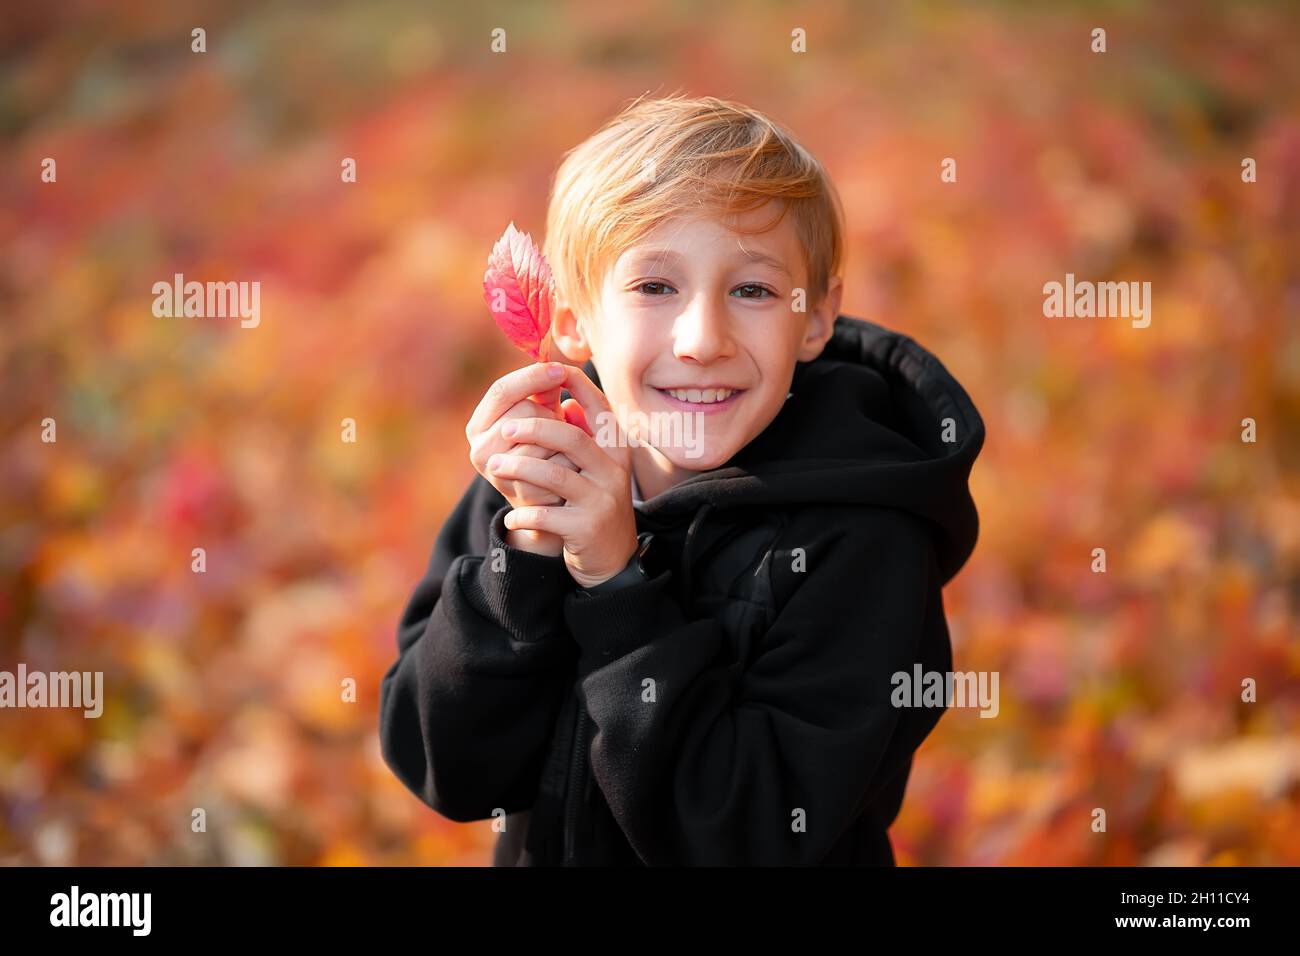 boy on a beautiful background of blurry autumn leaves, holding a leaf in his hands. Stock Photo